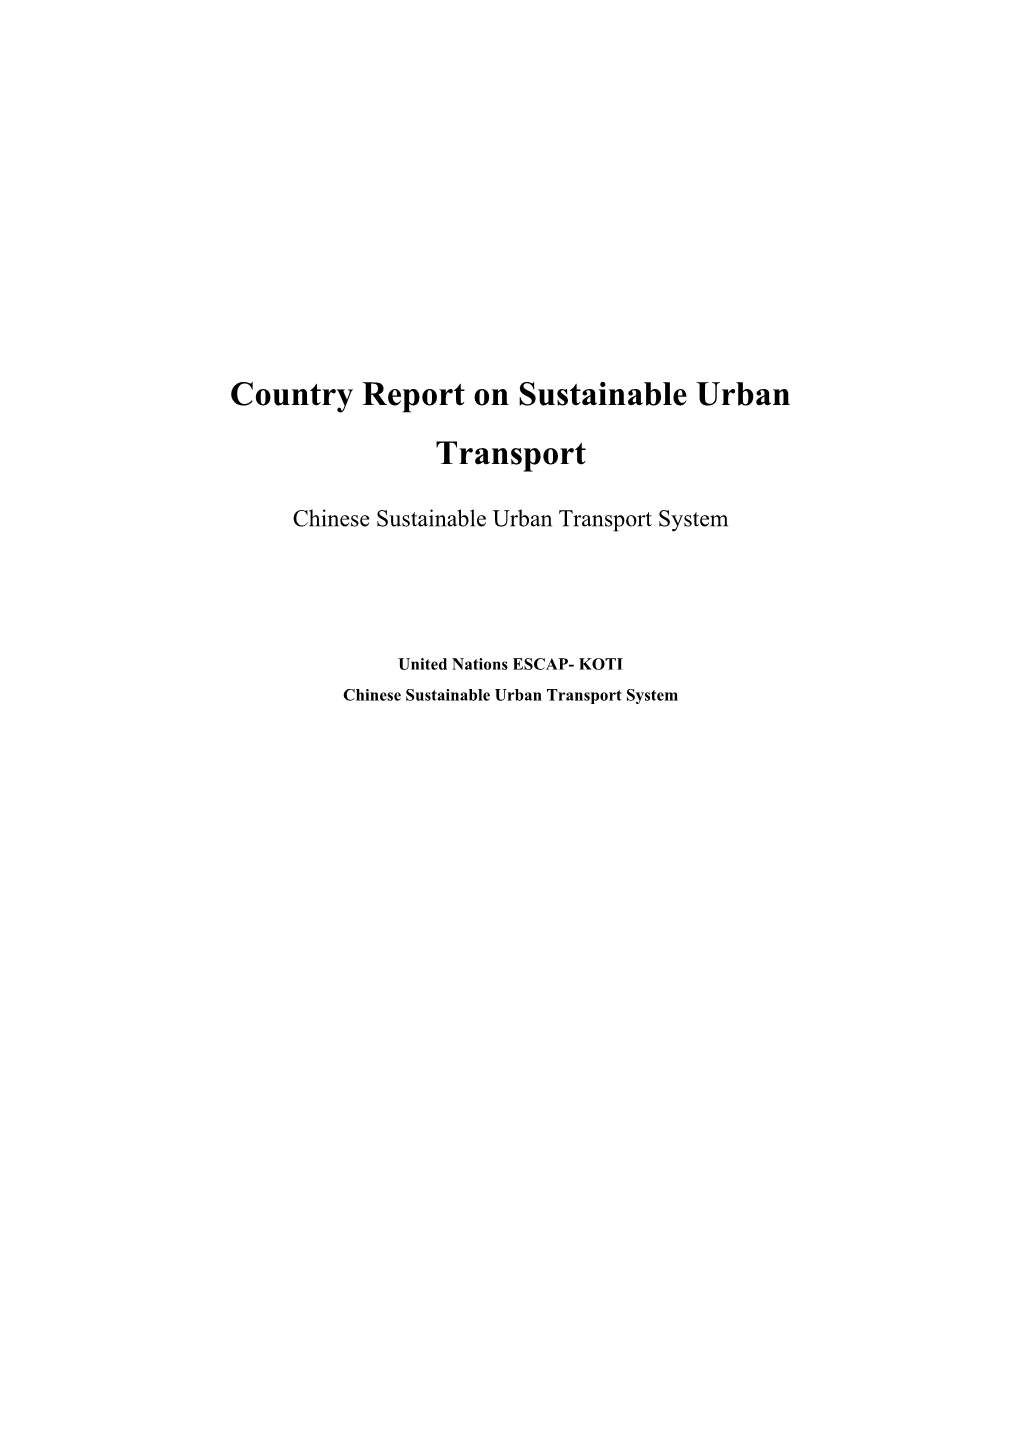 Country Report on Sustainable Urban Transport Chinese Sustainable Urban Transport System